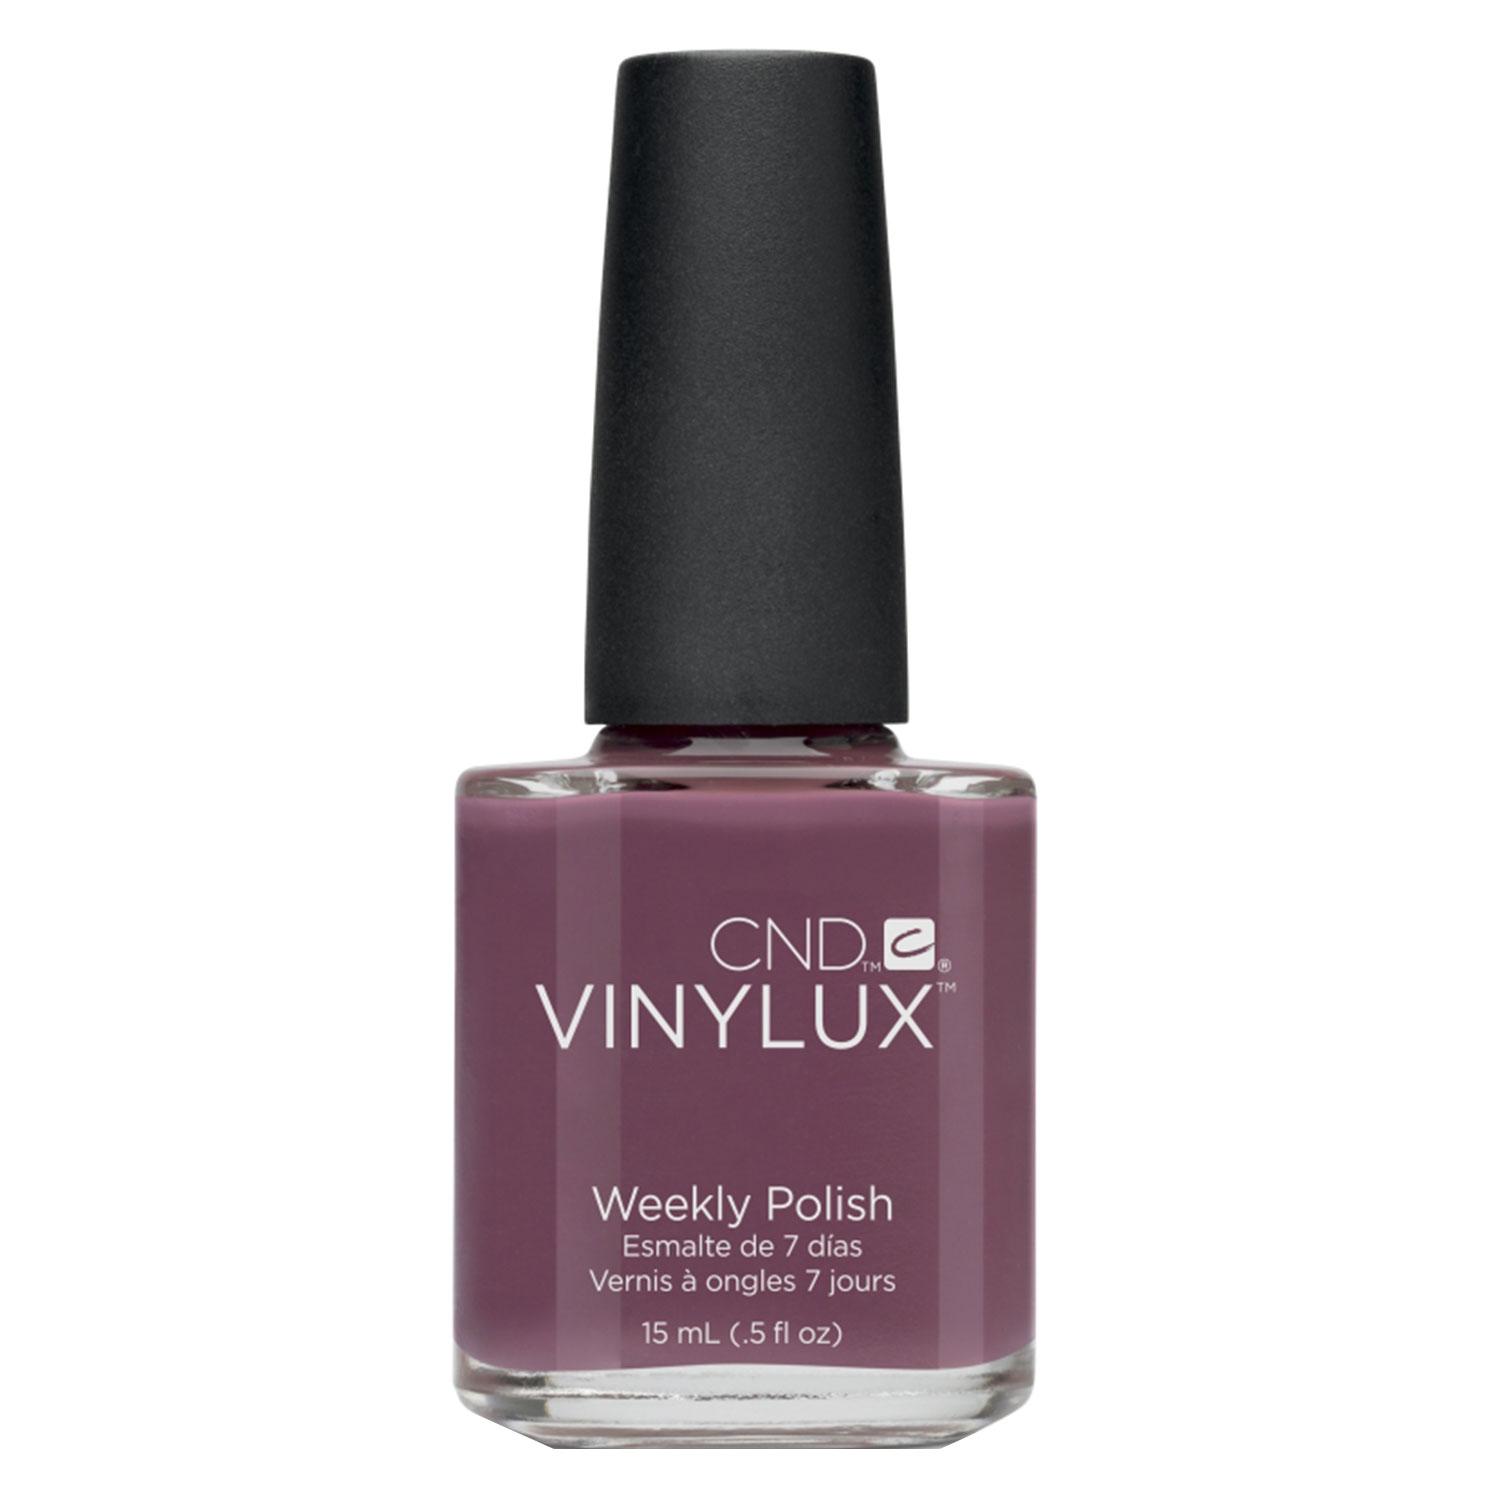 Vinylux - Weekly Polish Married to the Mauve 129